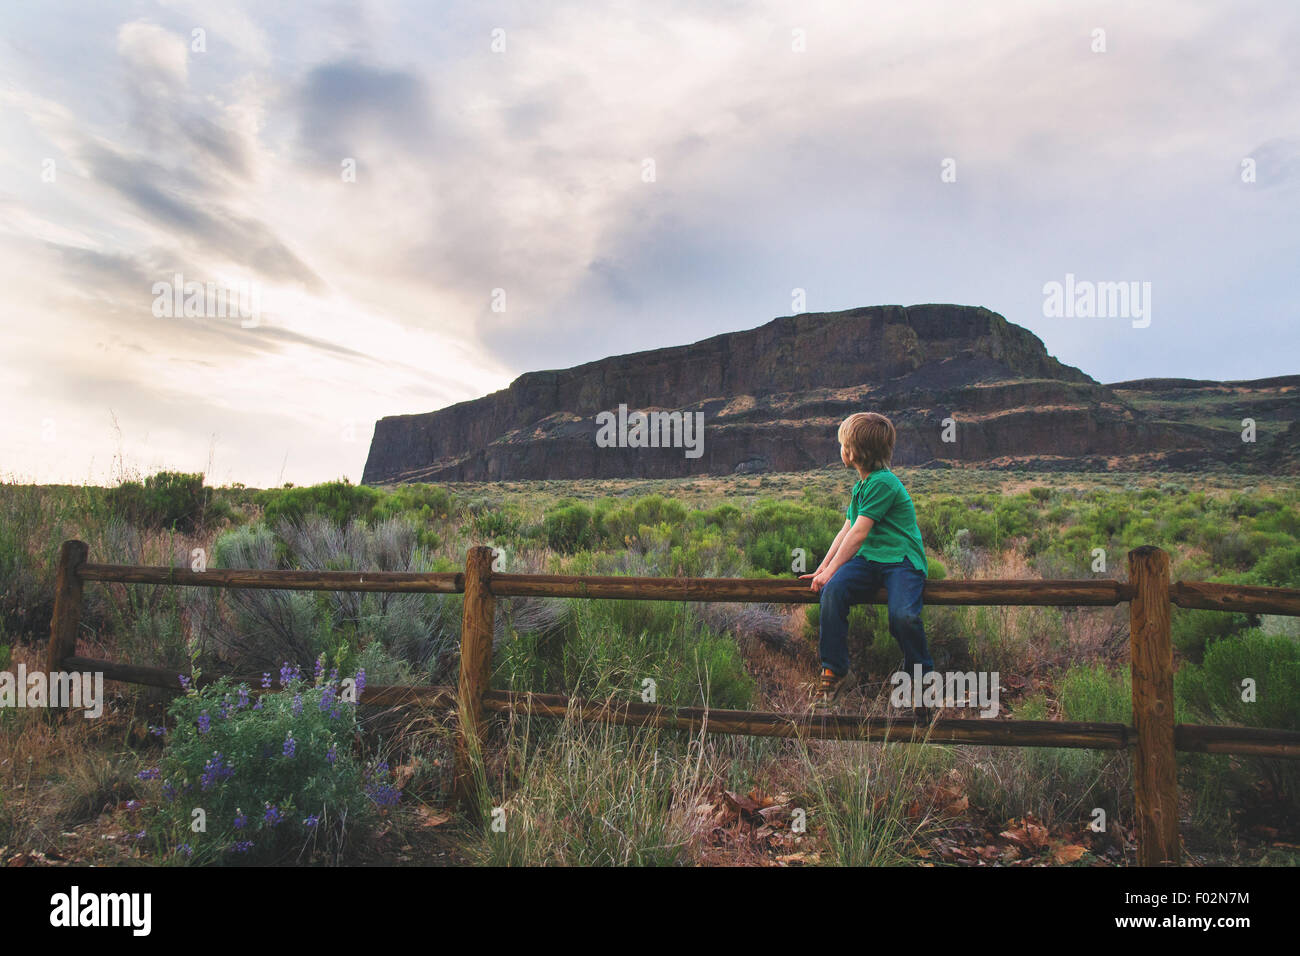 Boy sitting on wooden fence looking over his shoulder Stock Photo